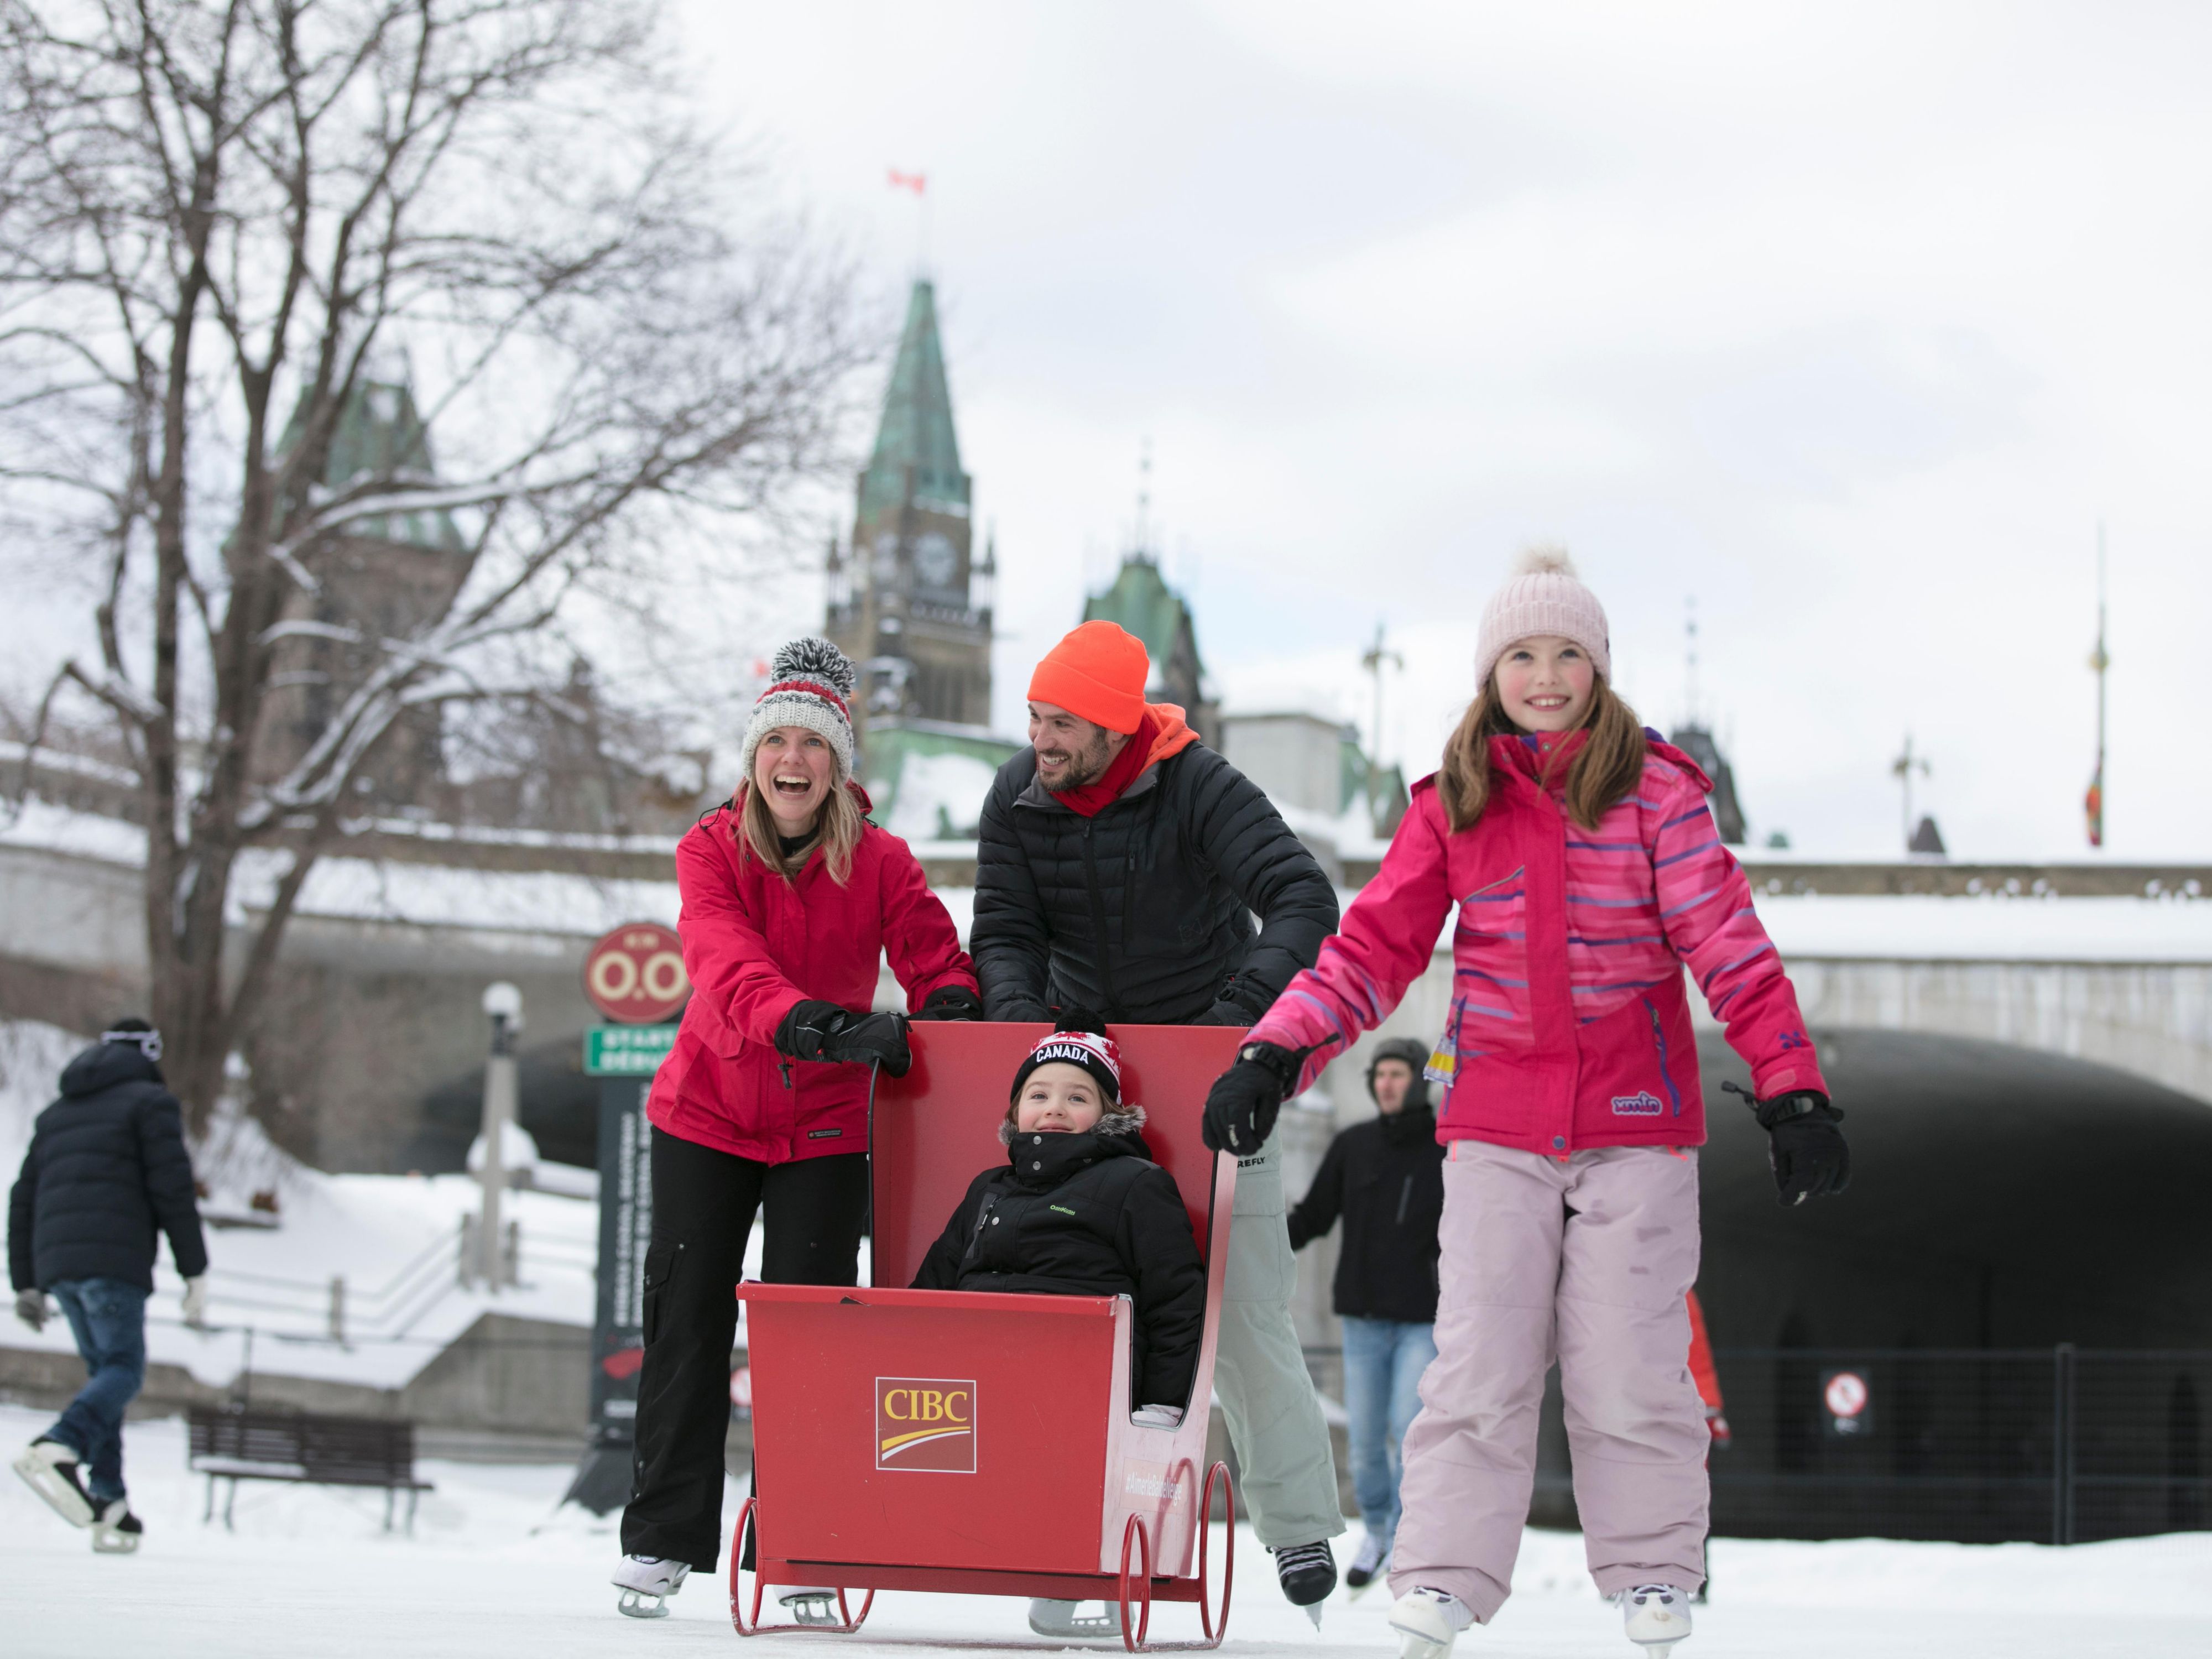 Enjoy our suggestions of Winter Activities - fun for the whole family.